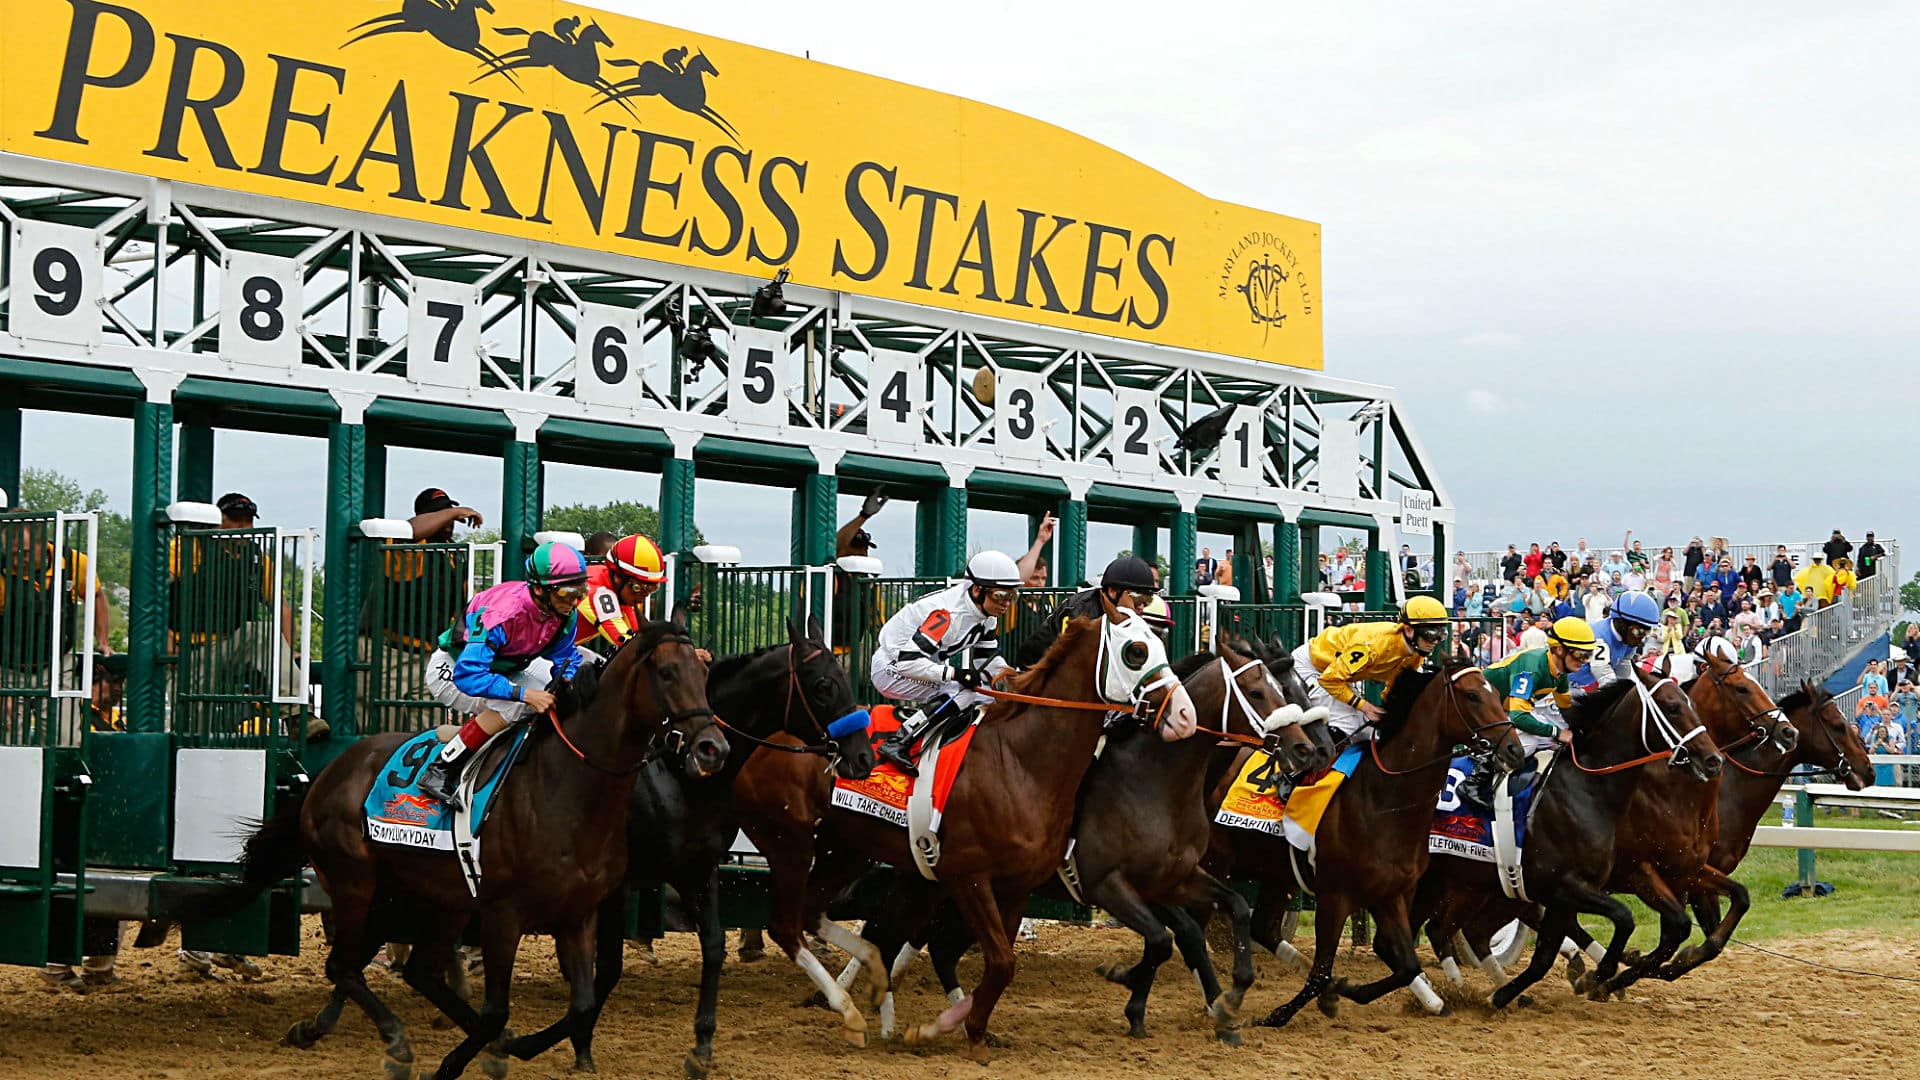 Preakness Stakes 2022 Live Stream How to Watch Horse Racing Online